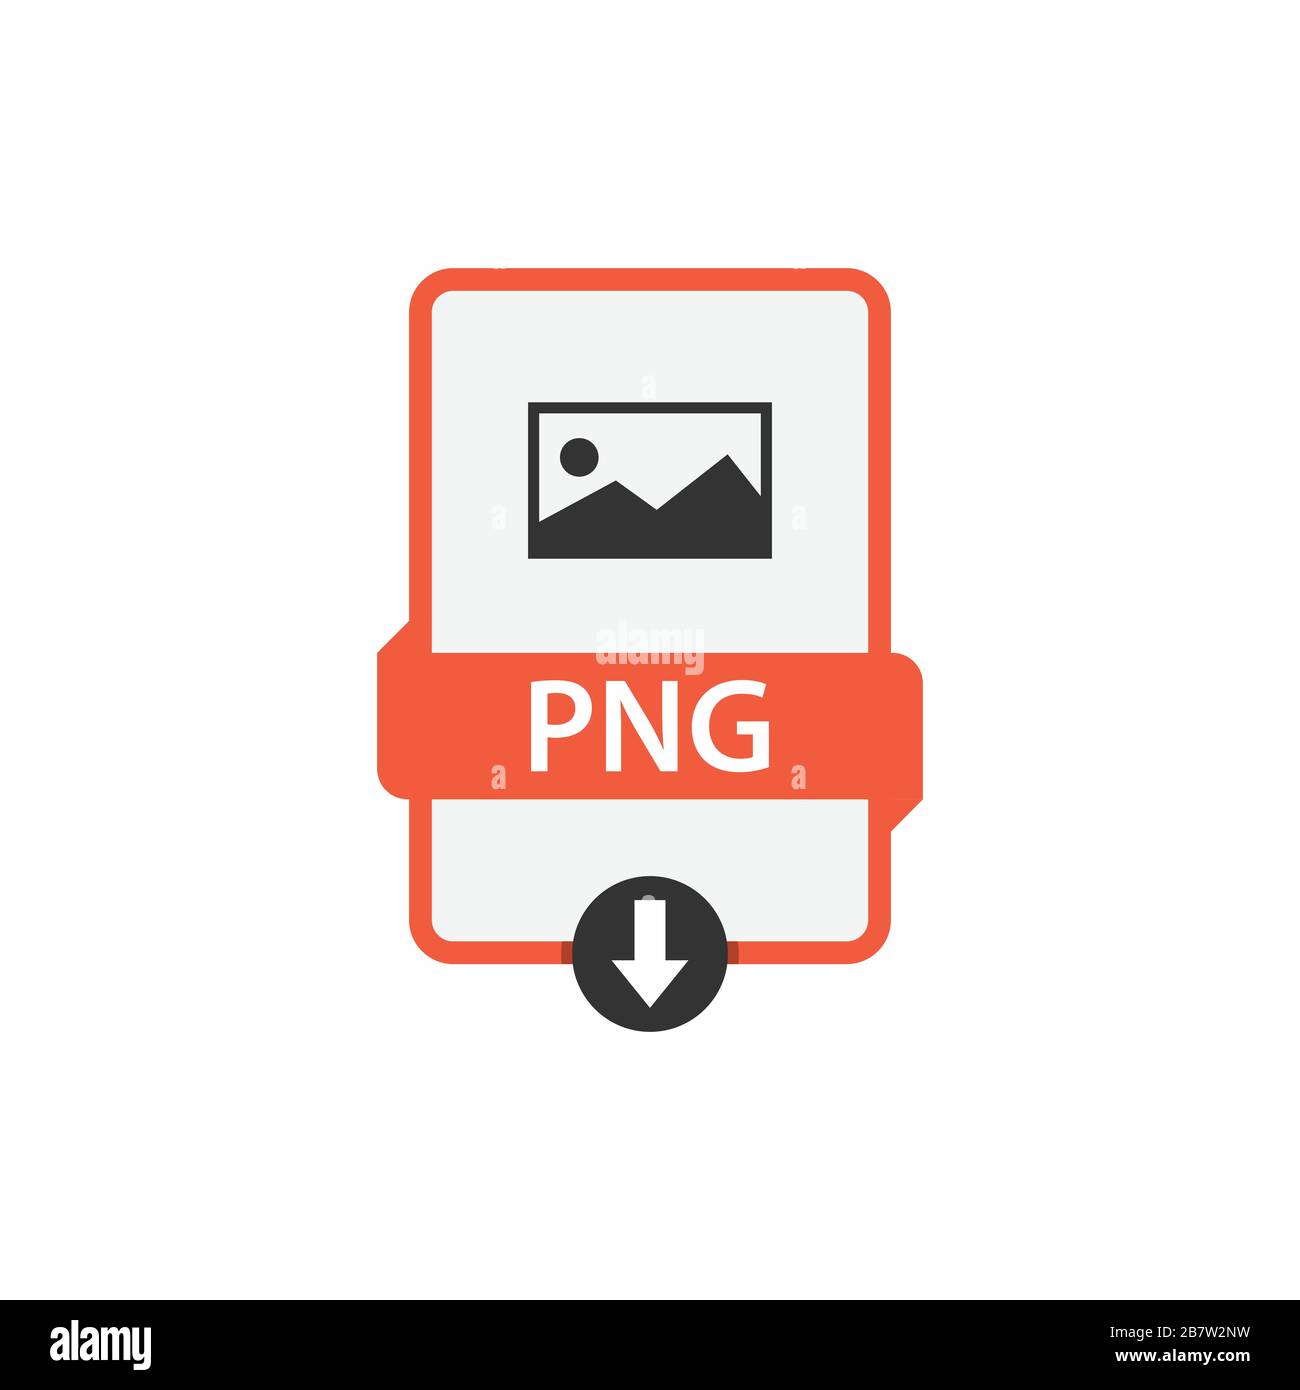 PNG download file format vector image. PNG file icon flat design graphic vector Stock Vector